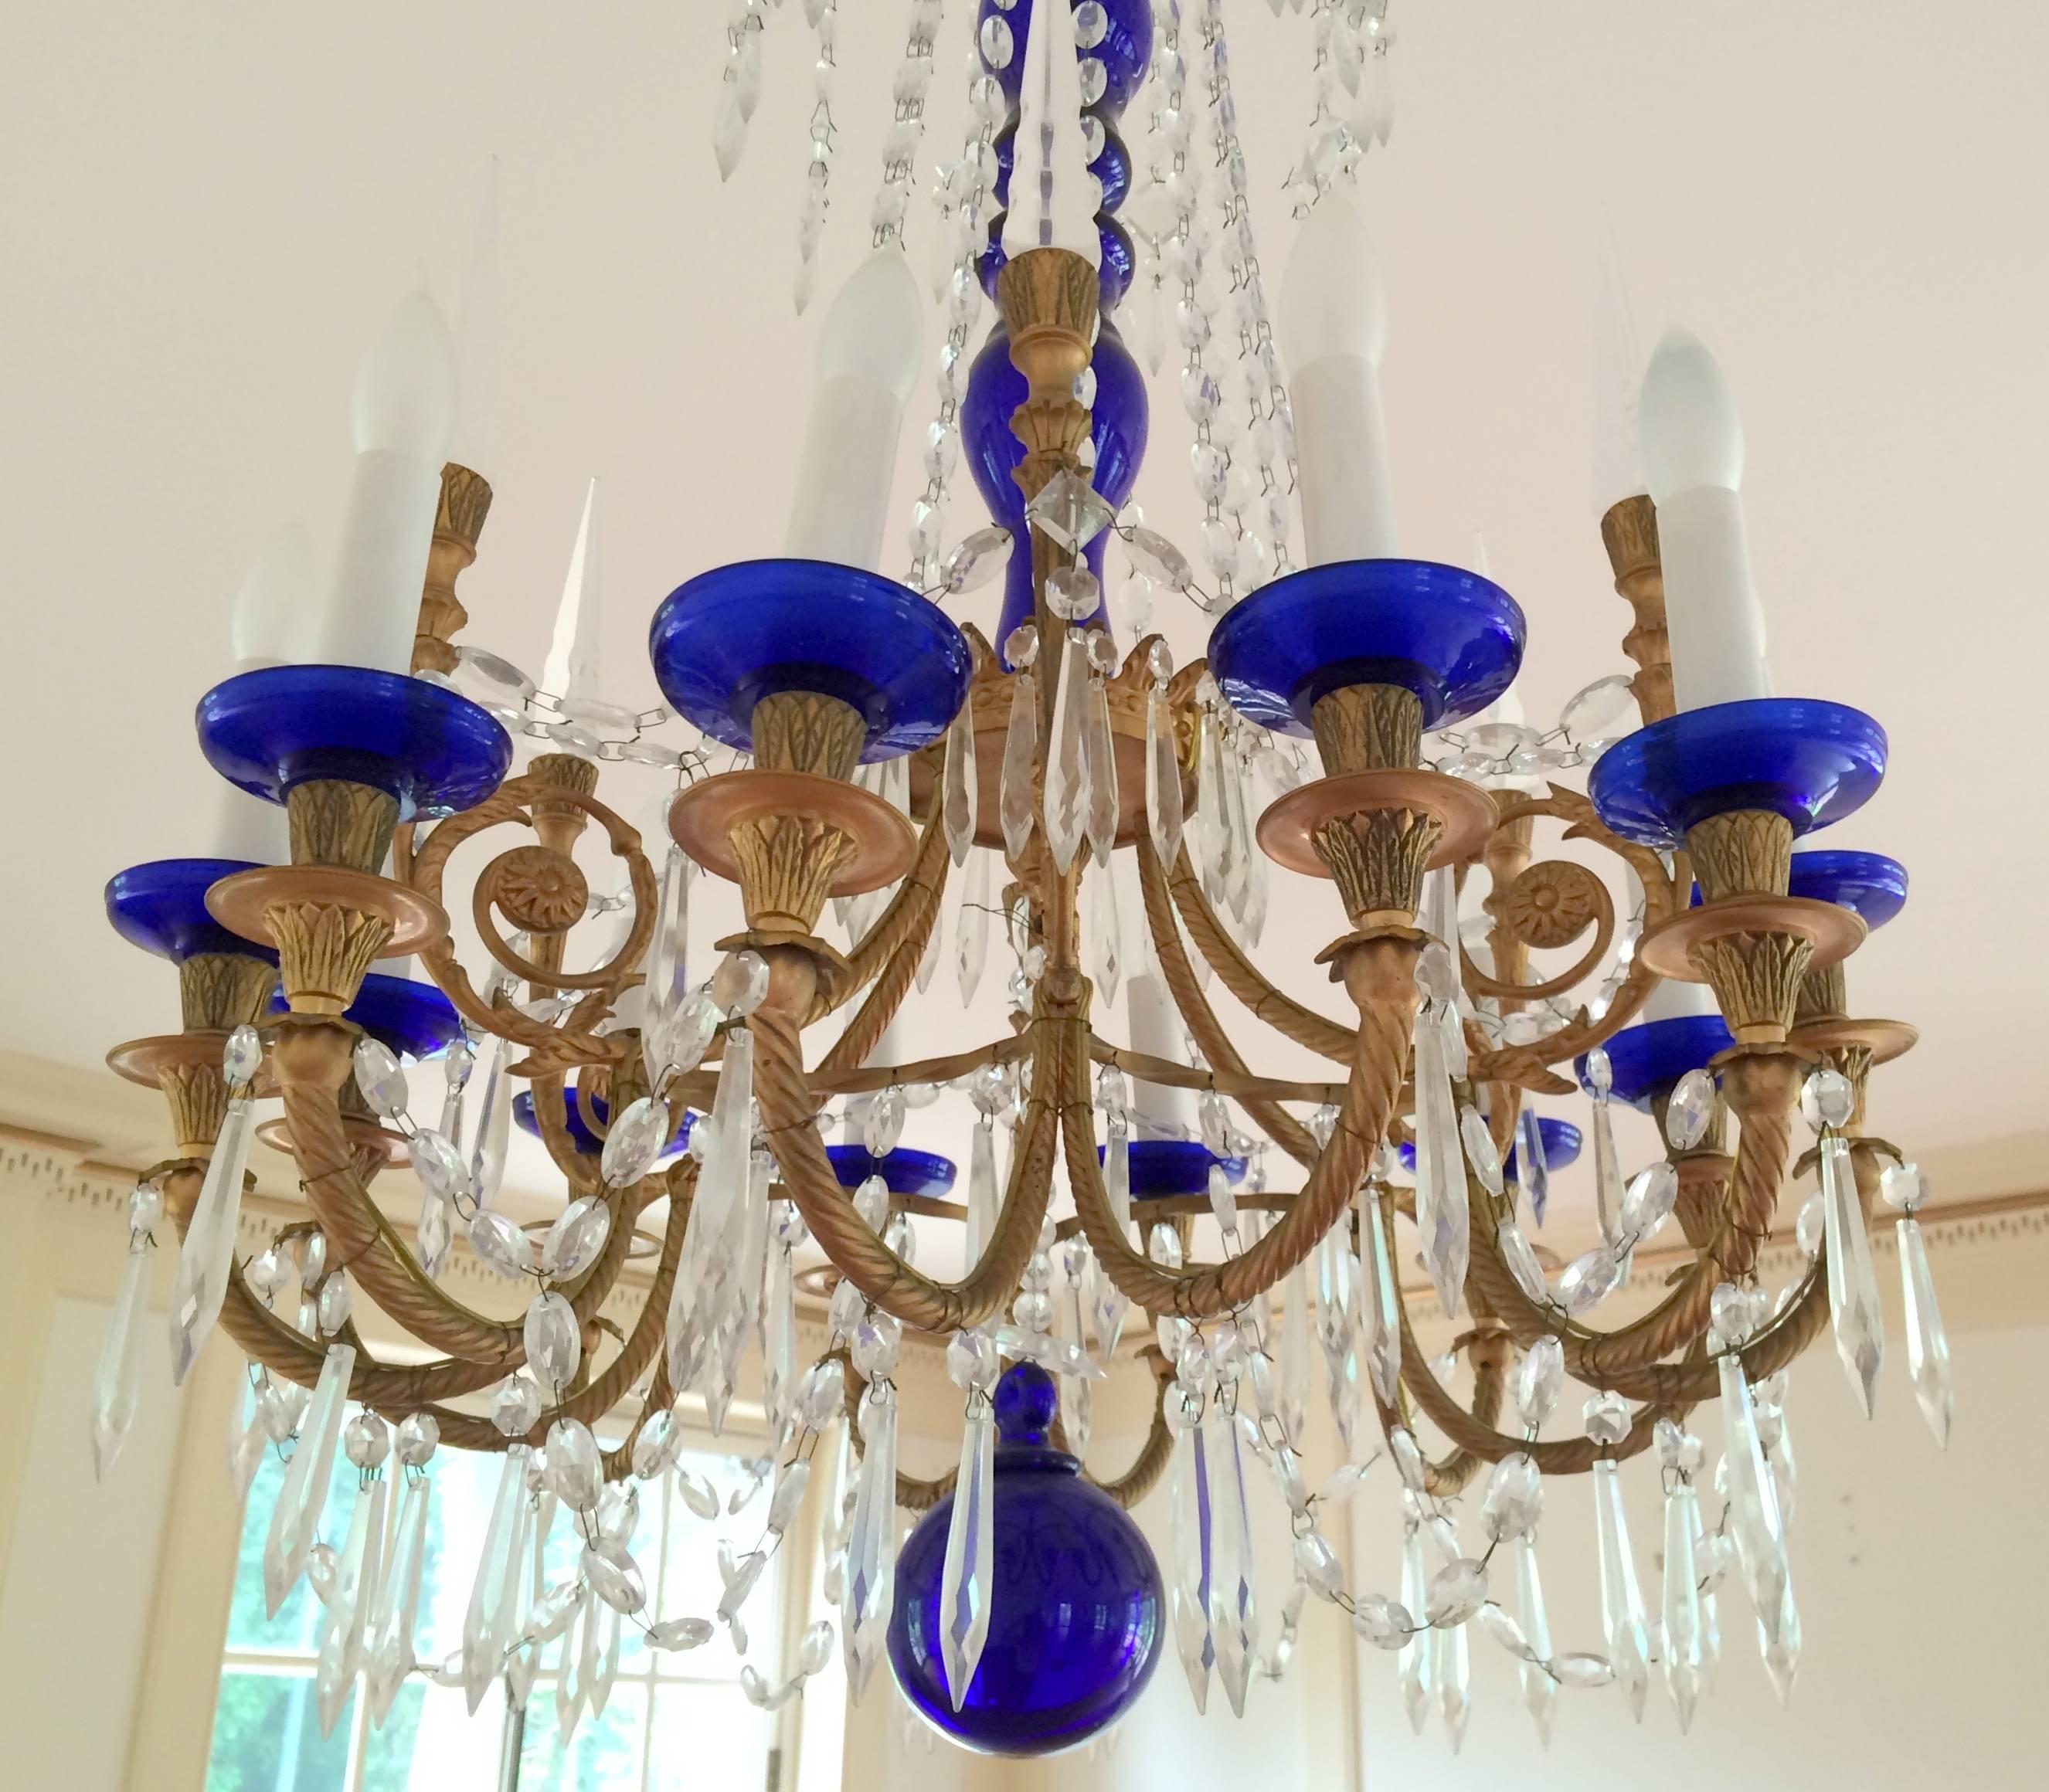 A wonderful pair of French doré bronze with cobalt blue center shaft, ball and accent cuos on each of the 12 lights, adorned with crystals to these Regency / neoclassical chandeliers.